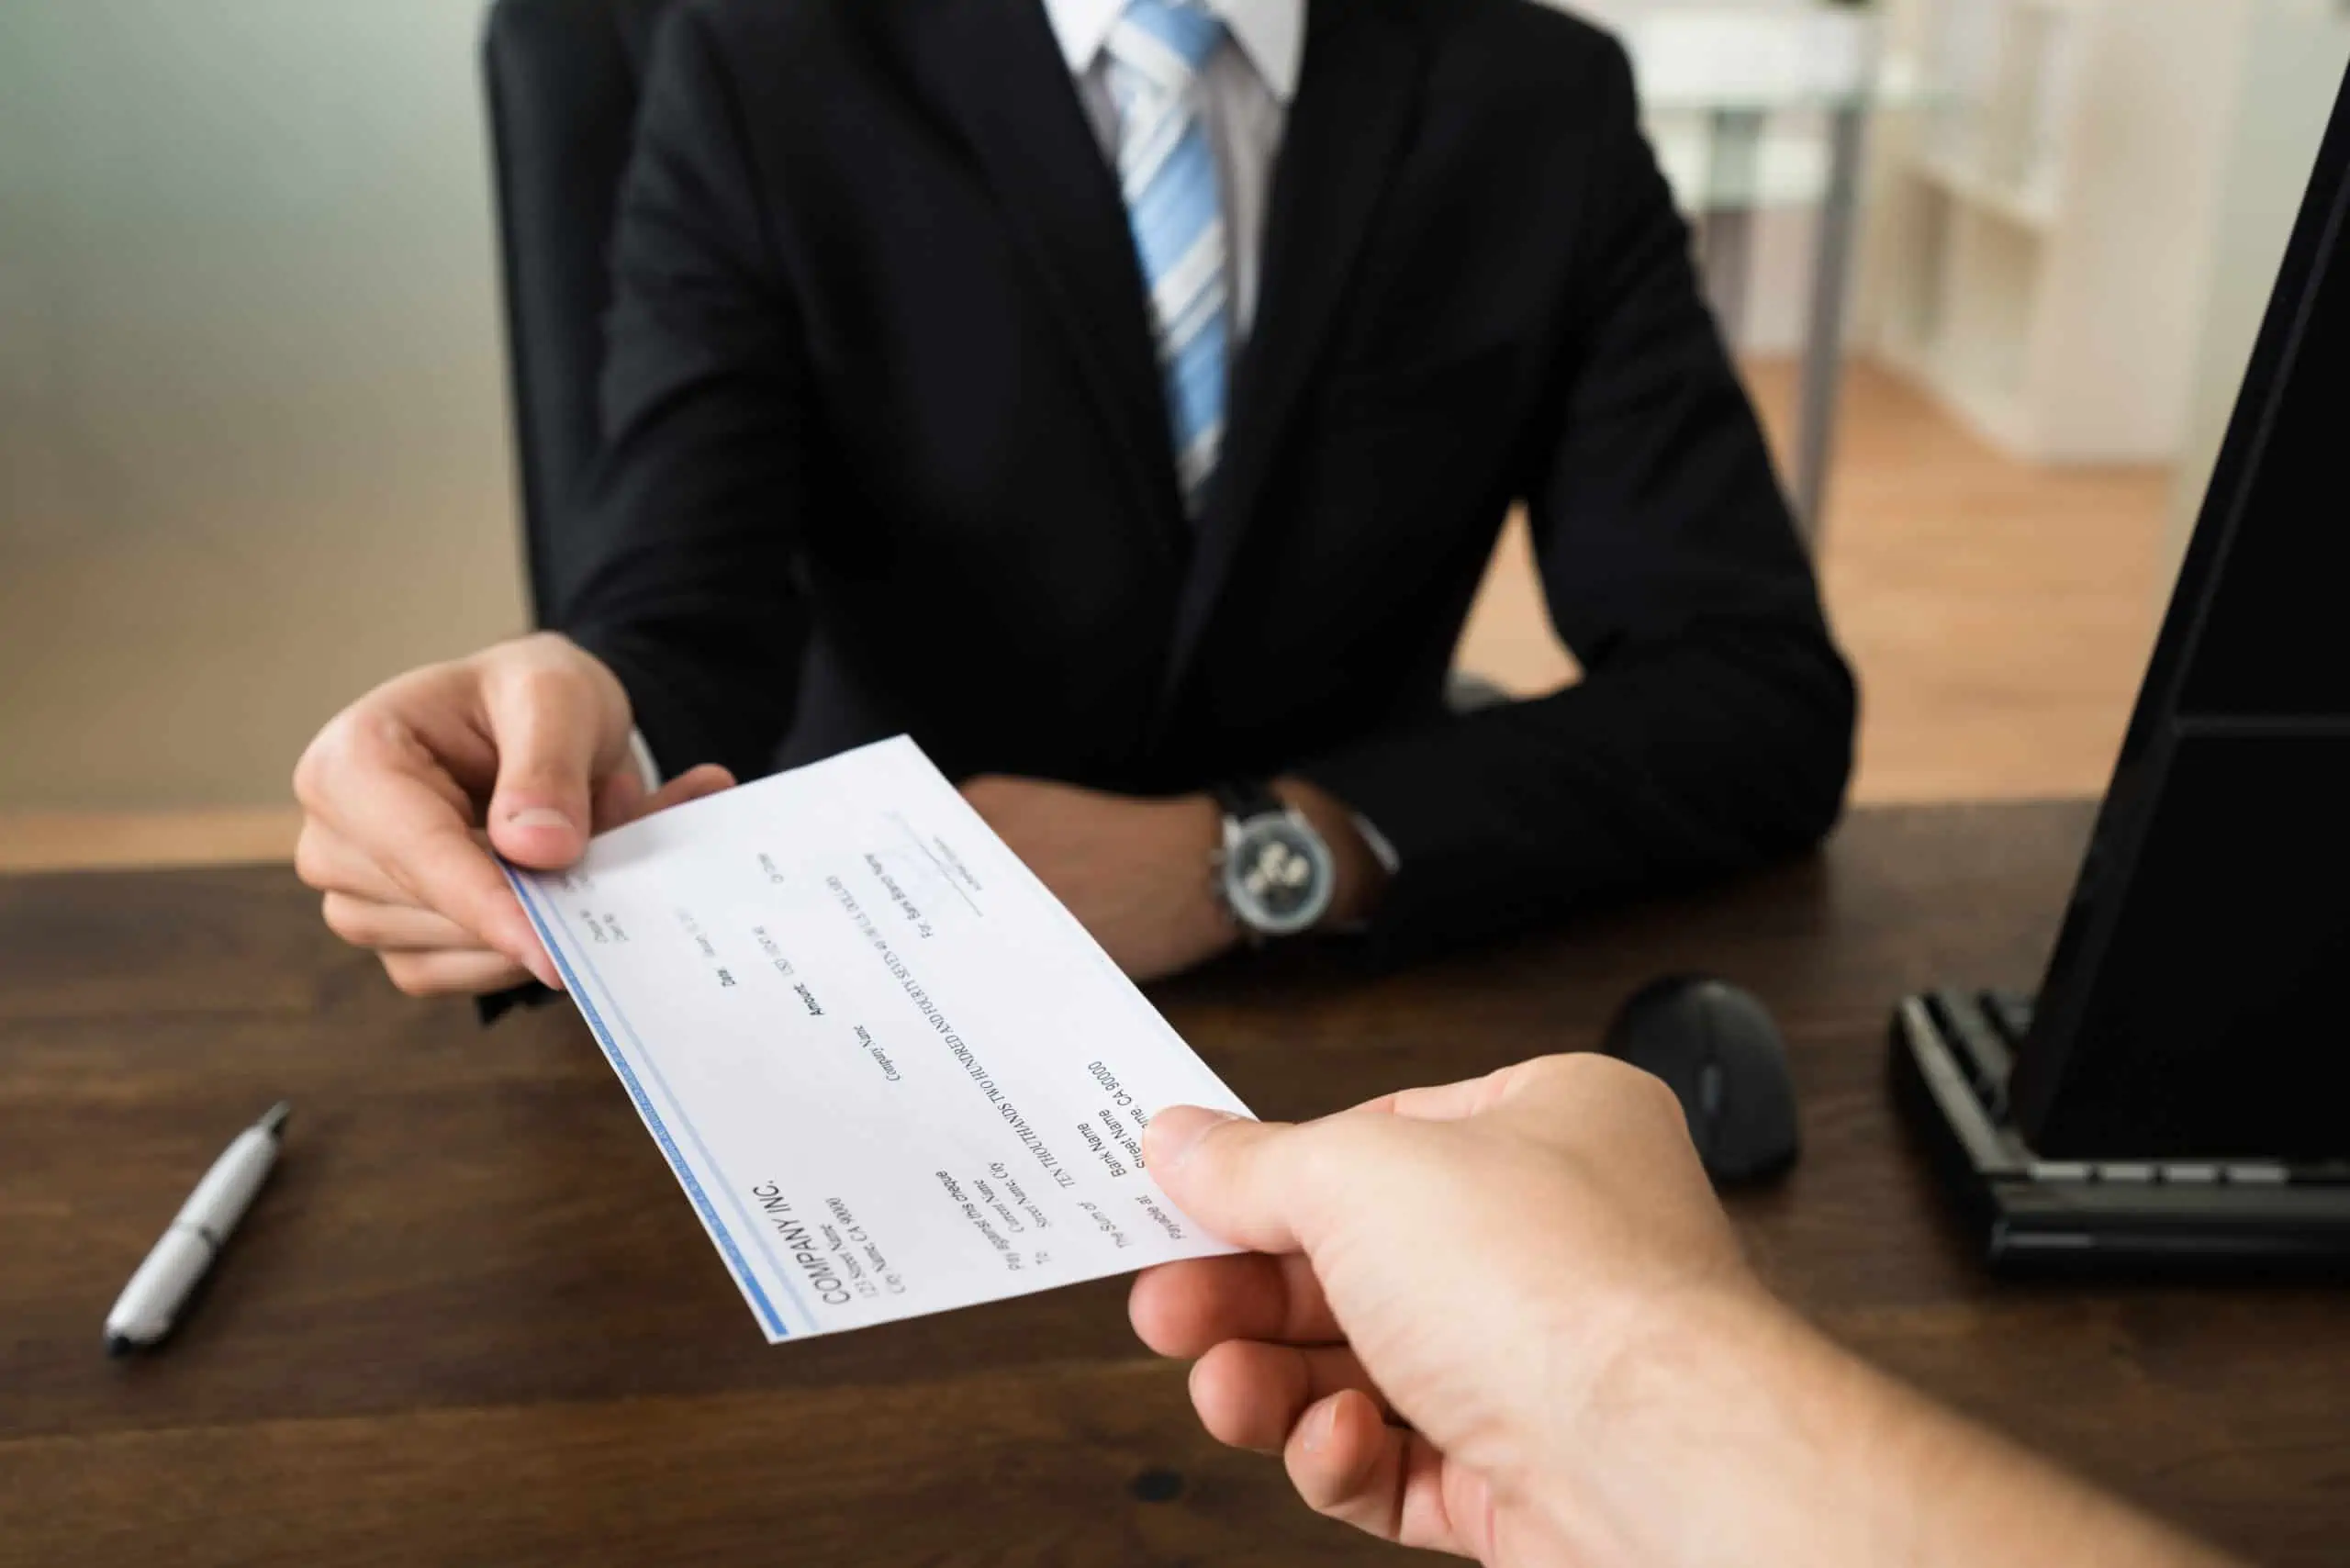 Handing tax preparer a check to pay for individual income tax return preparation